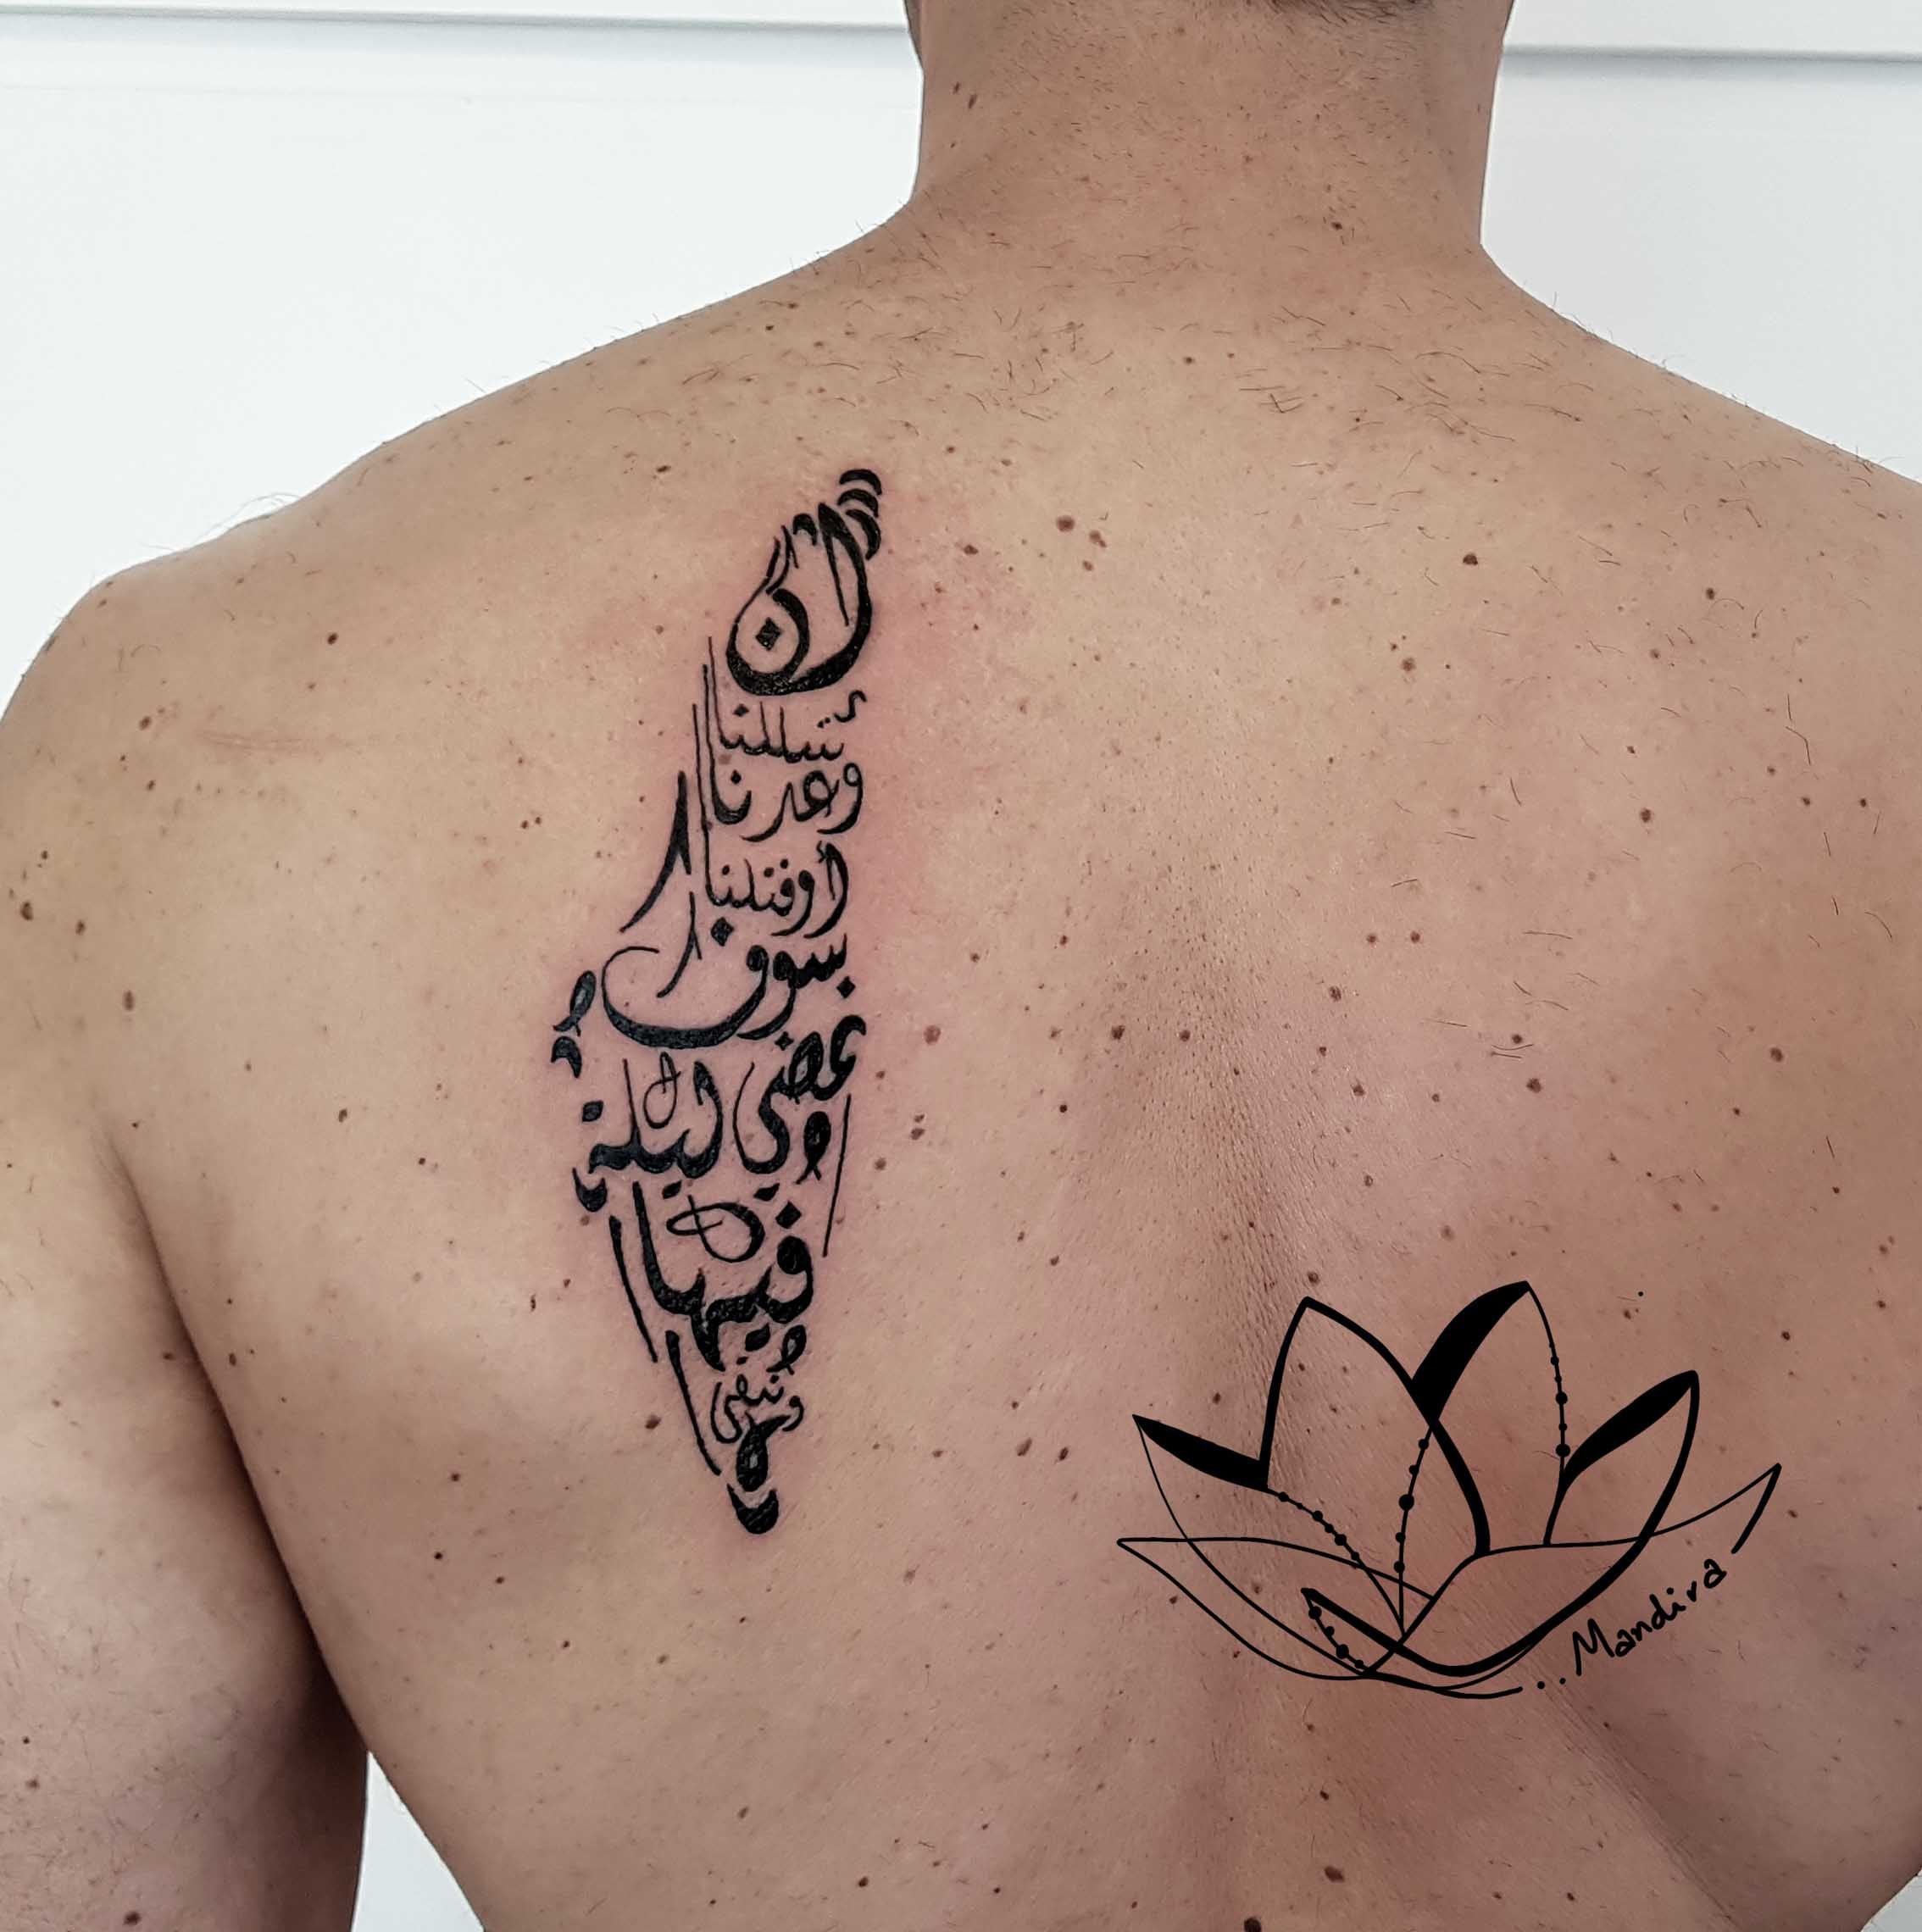 Tattoos | By Our Readers | Issue 569 | The Sun Magazine